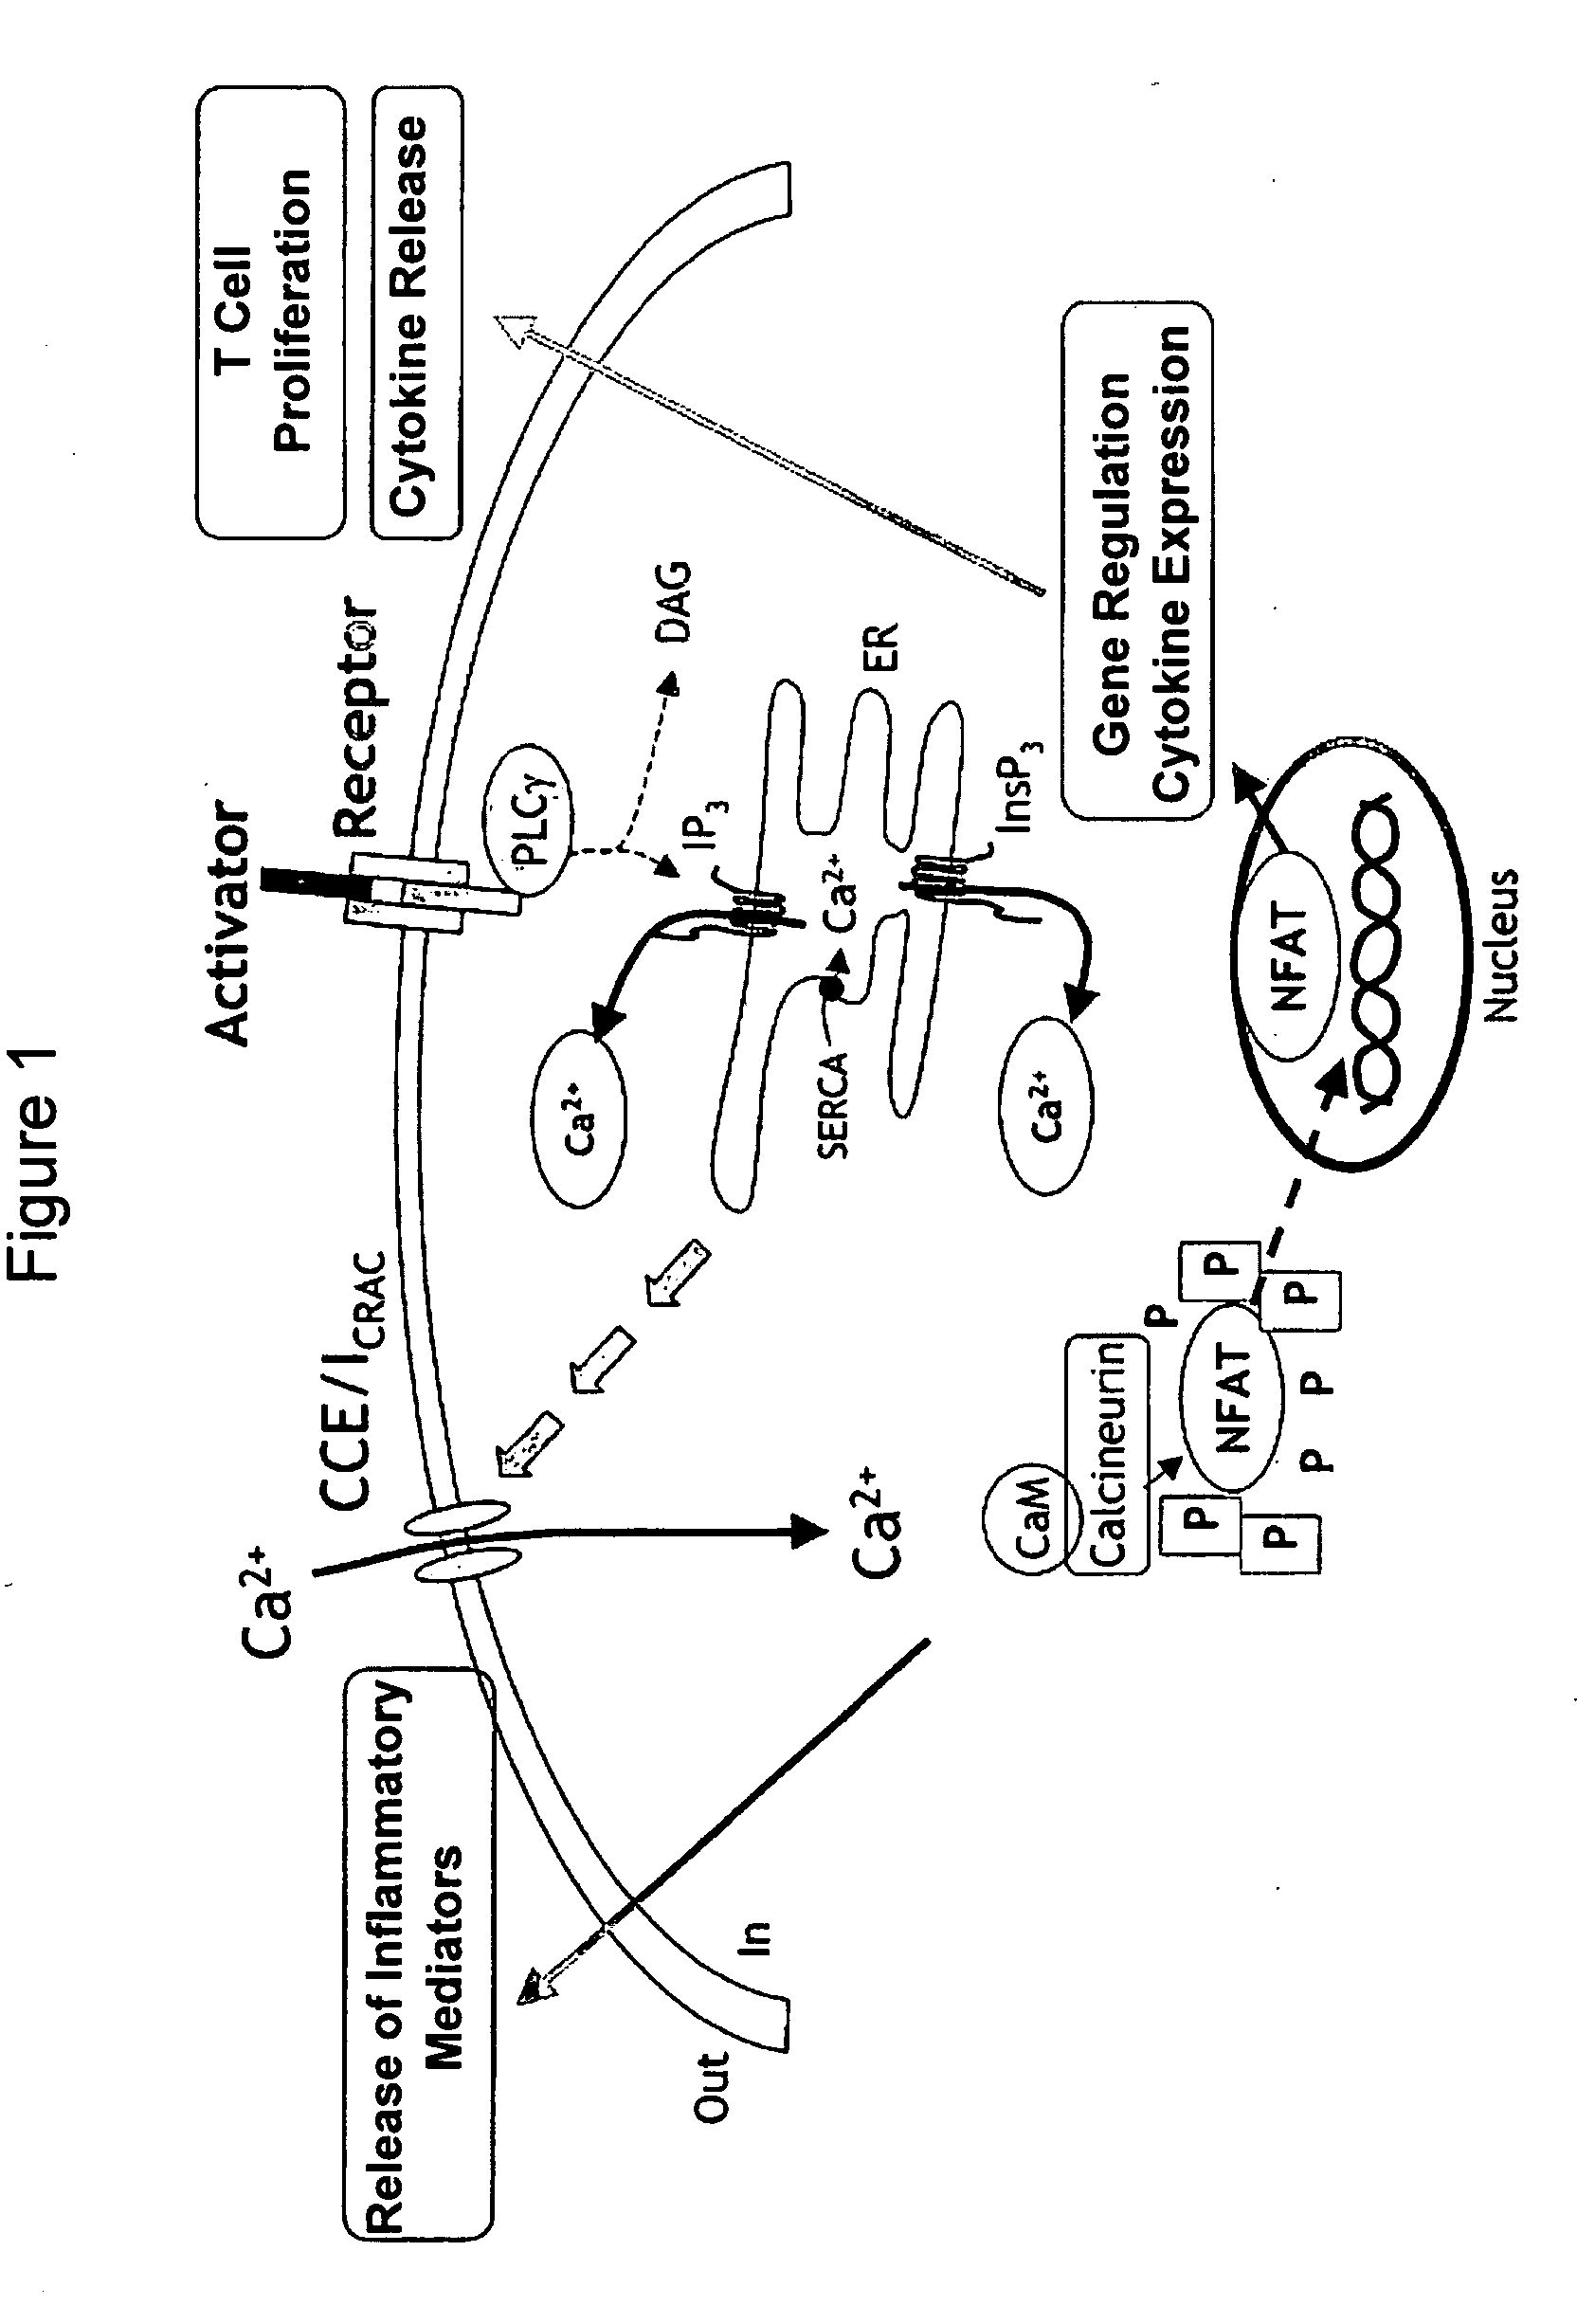 Methods of modulating and identifying agents that modulate intracellular calcium